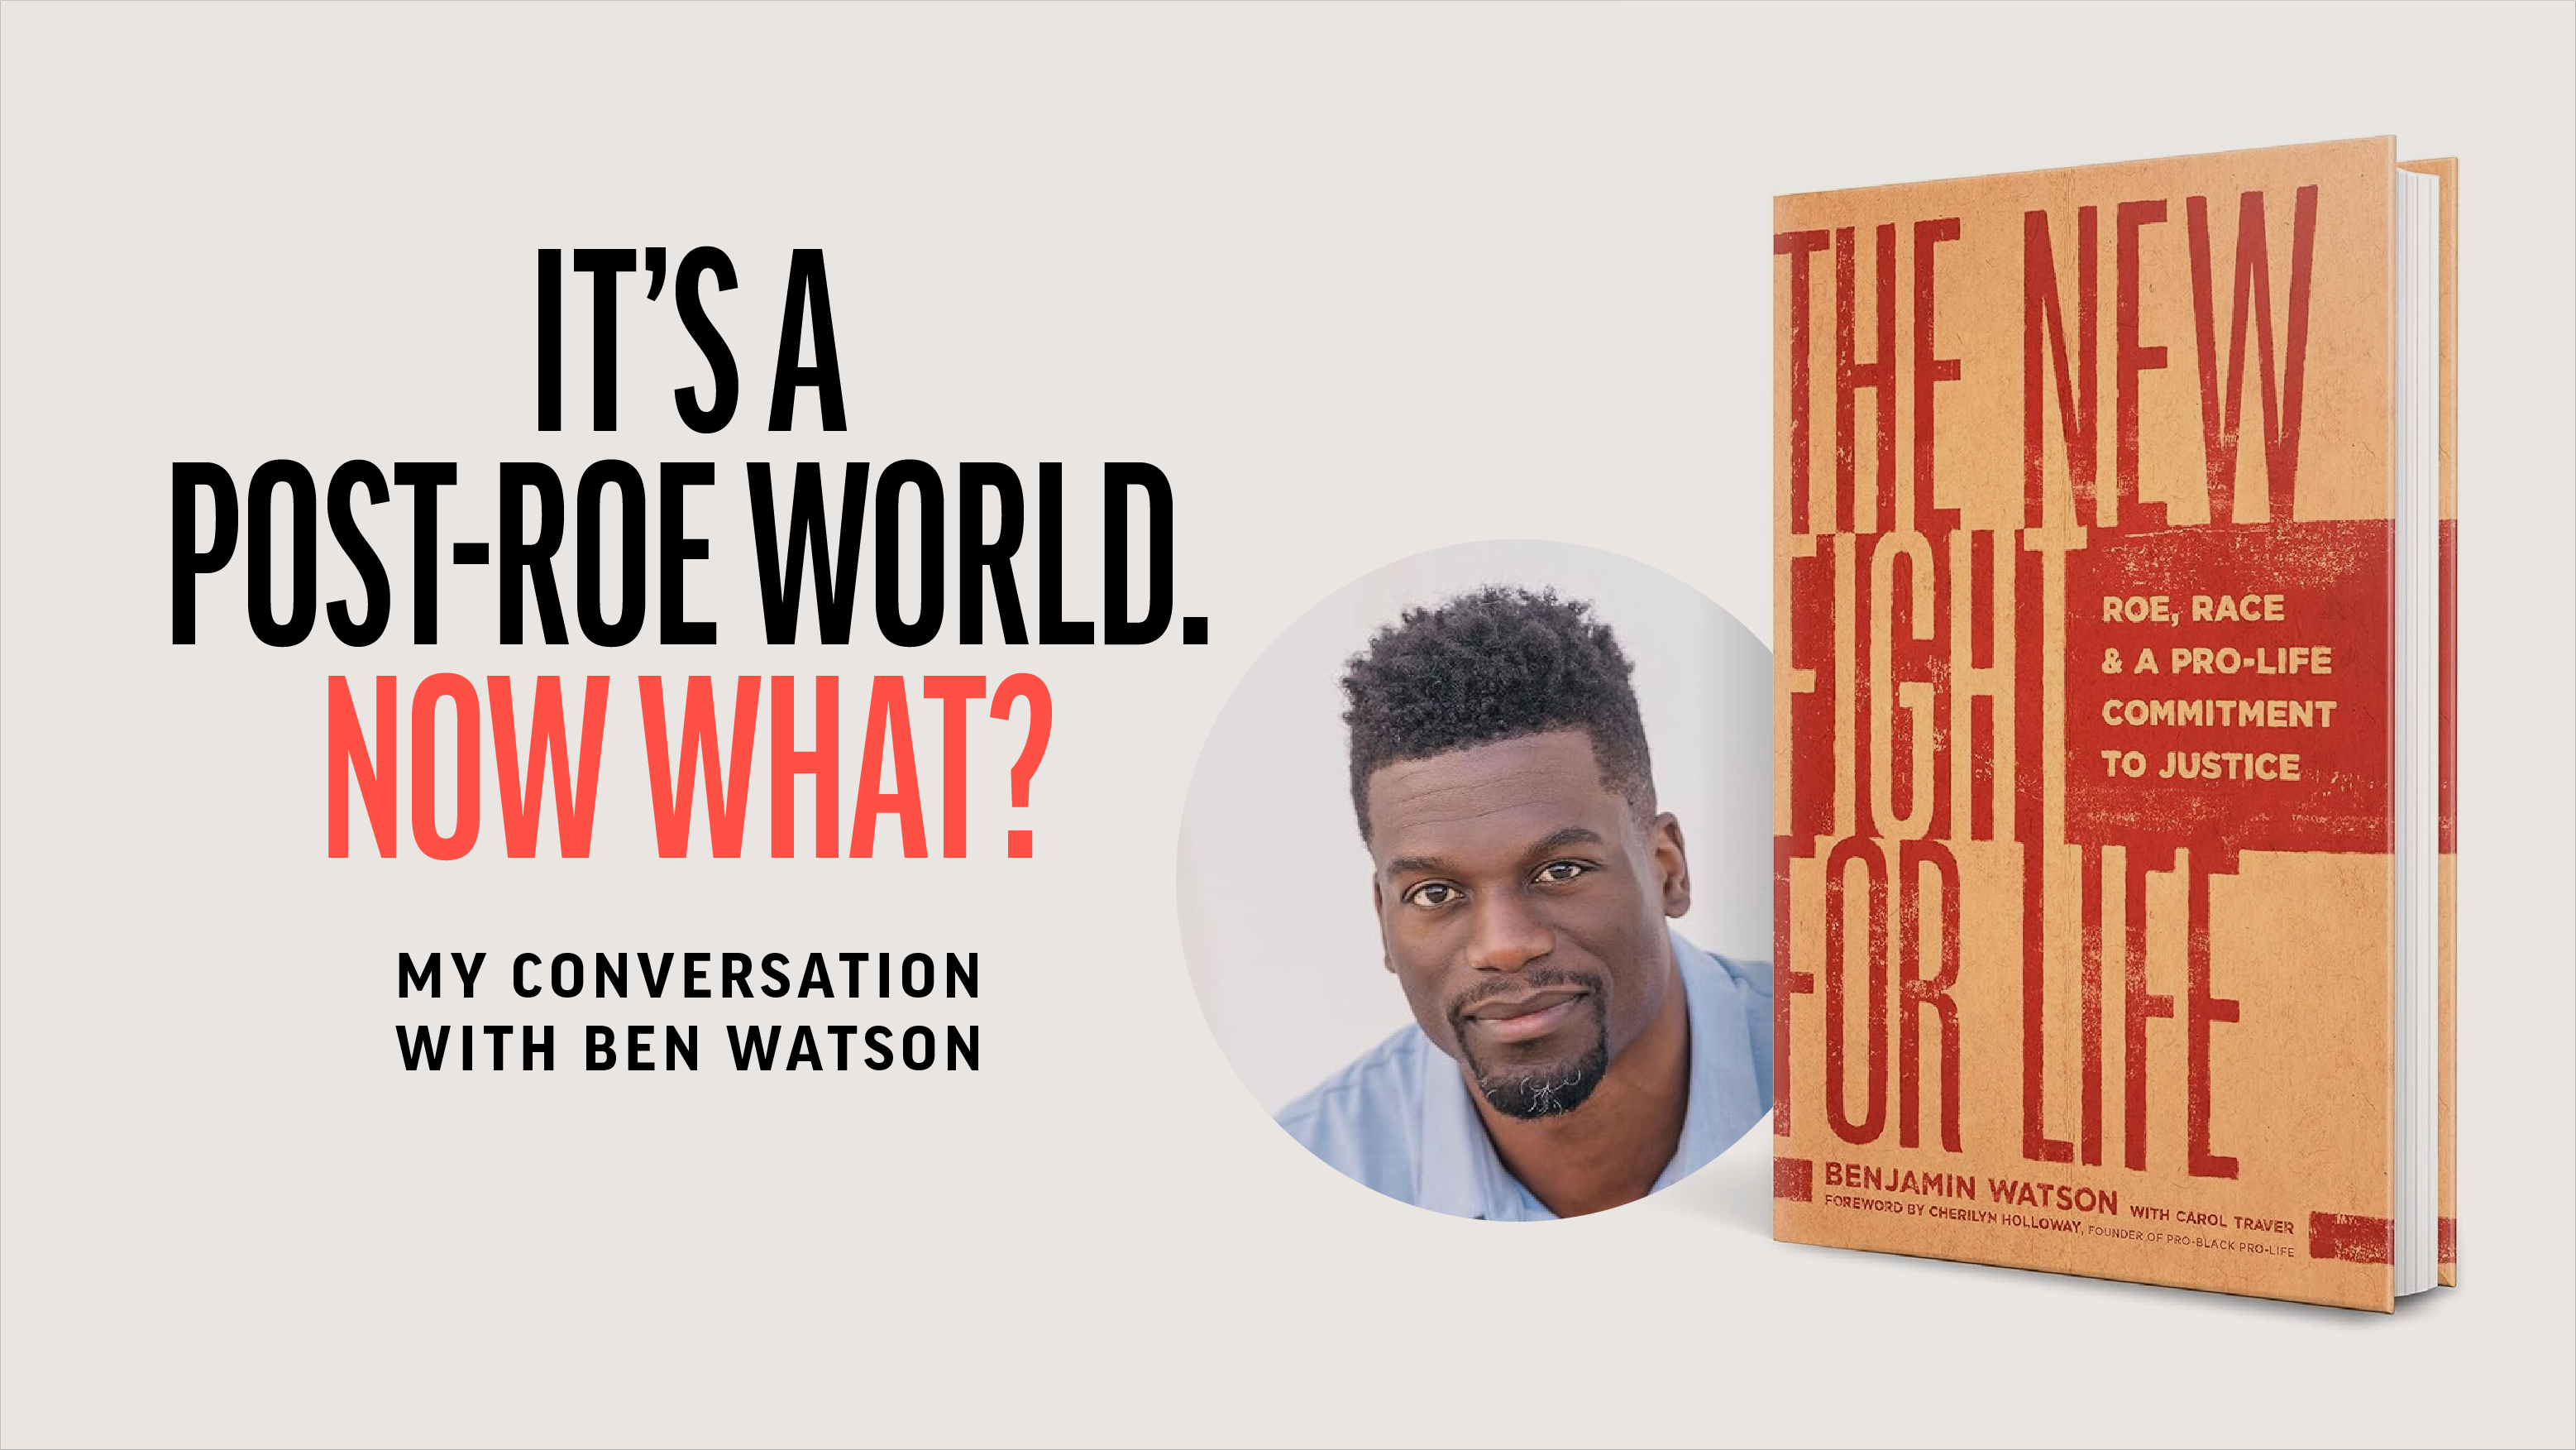 It's a Post-Roe World. Now What? My Conversation with Ben Watson